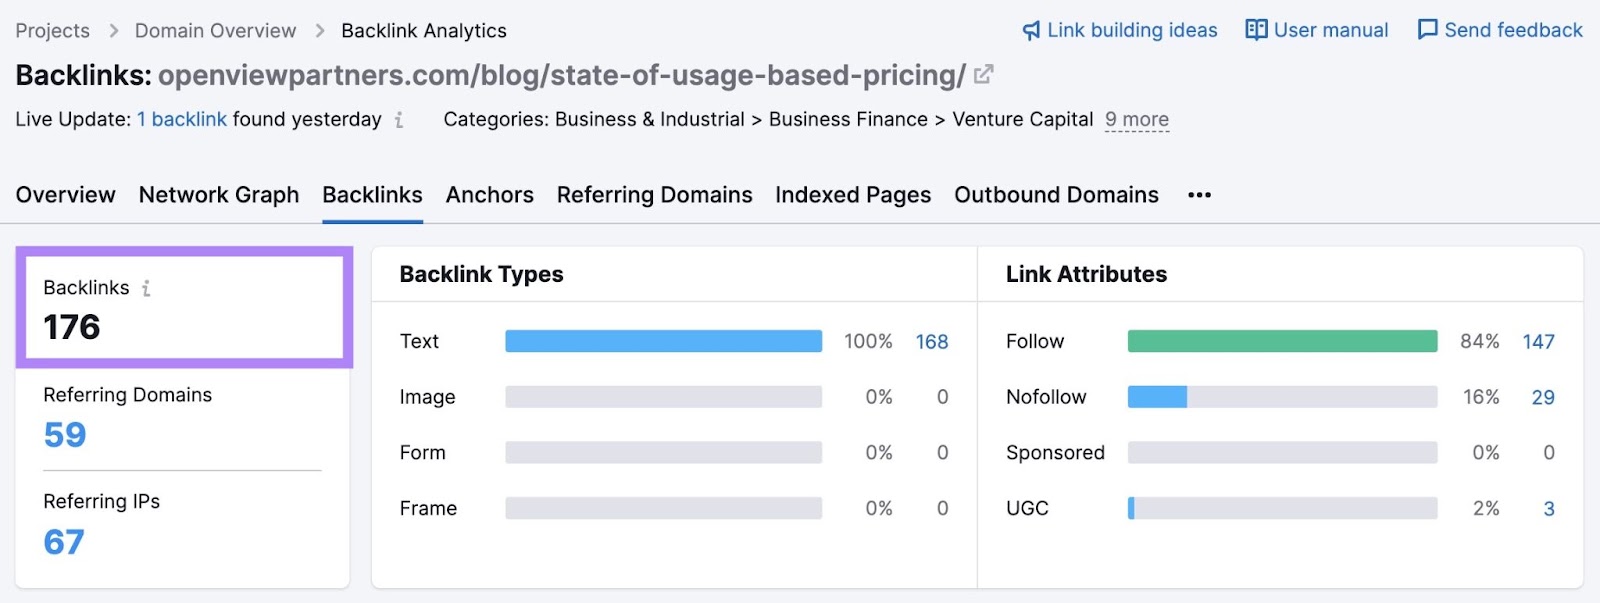 pricing survey  from OpenView Venture Partners has implicit    170 backlinks